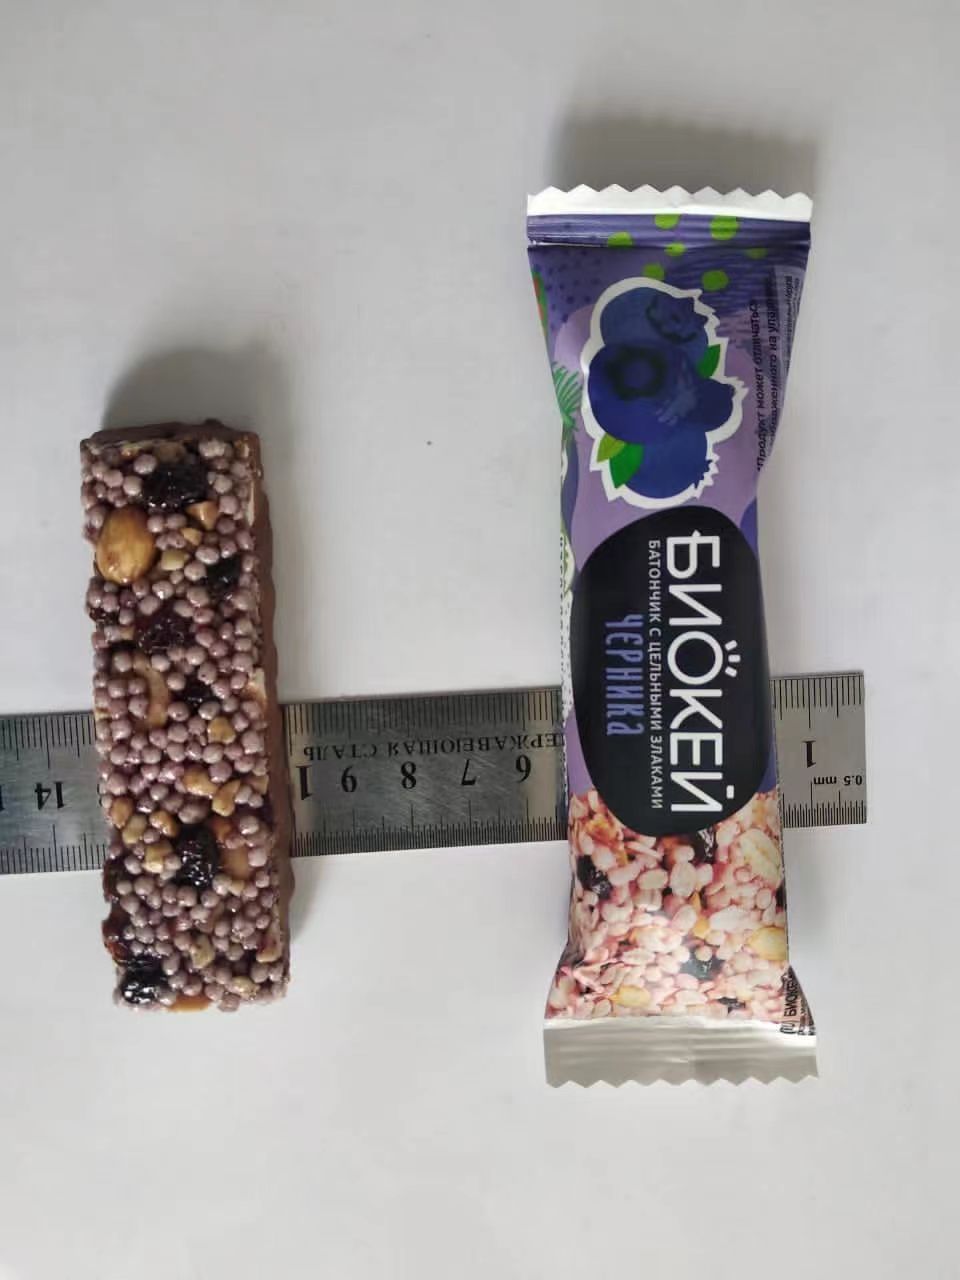 Automatic Feeding Granola Bars/Cereal Bar Pillow Packing Machine